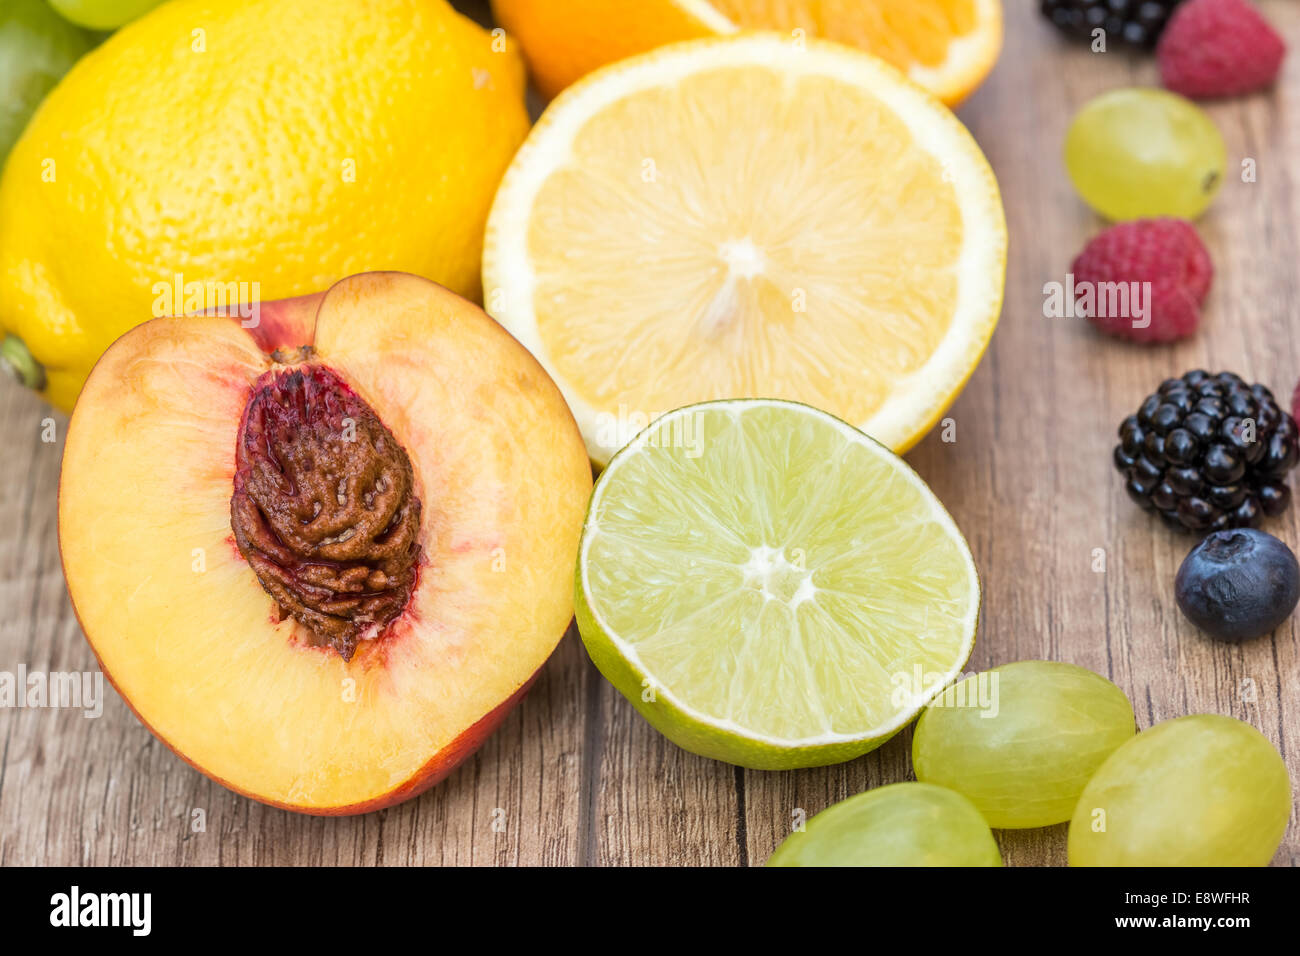 Assortment Of Fresh Exotic Fruits On Wood Table Stock Photo